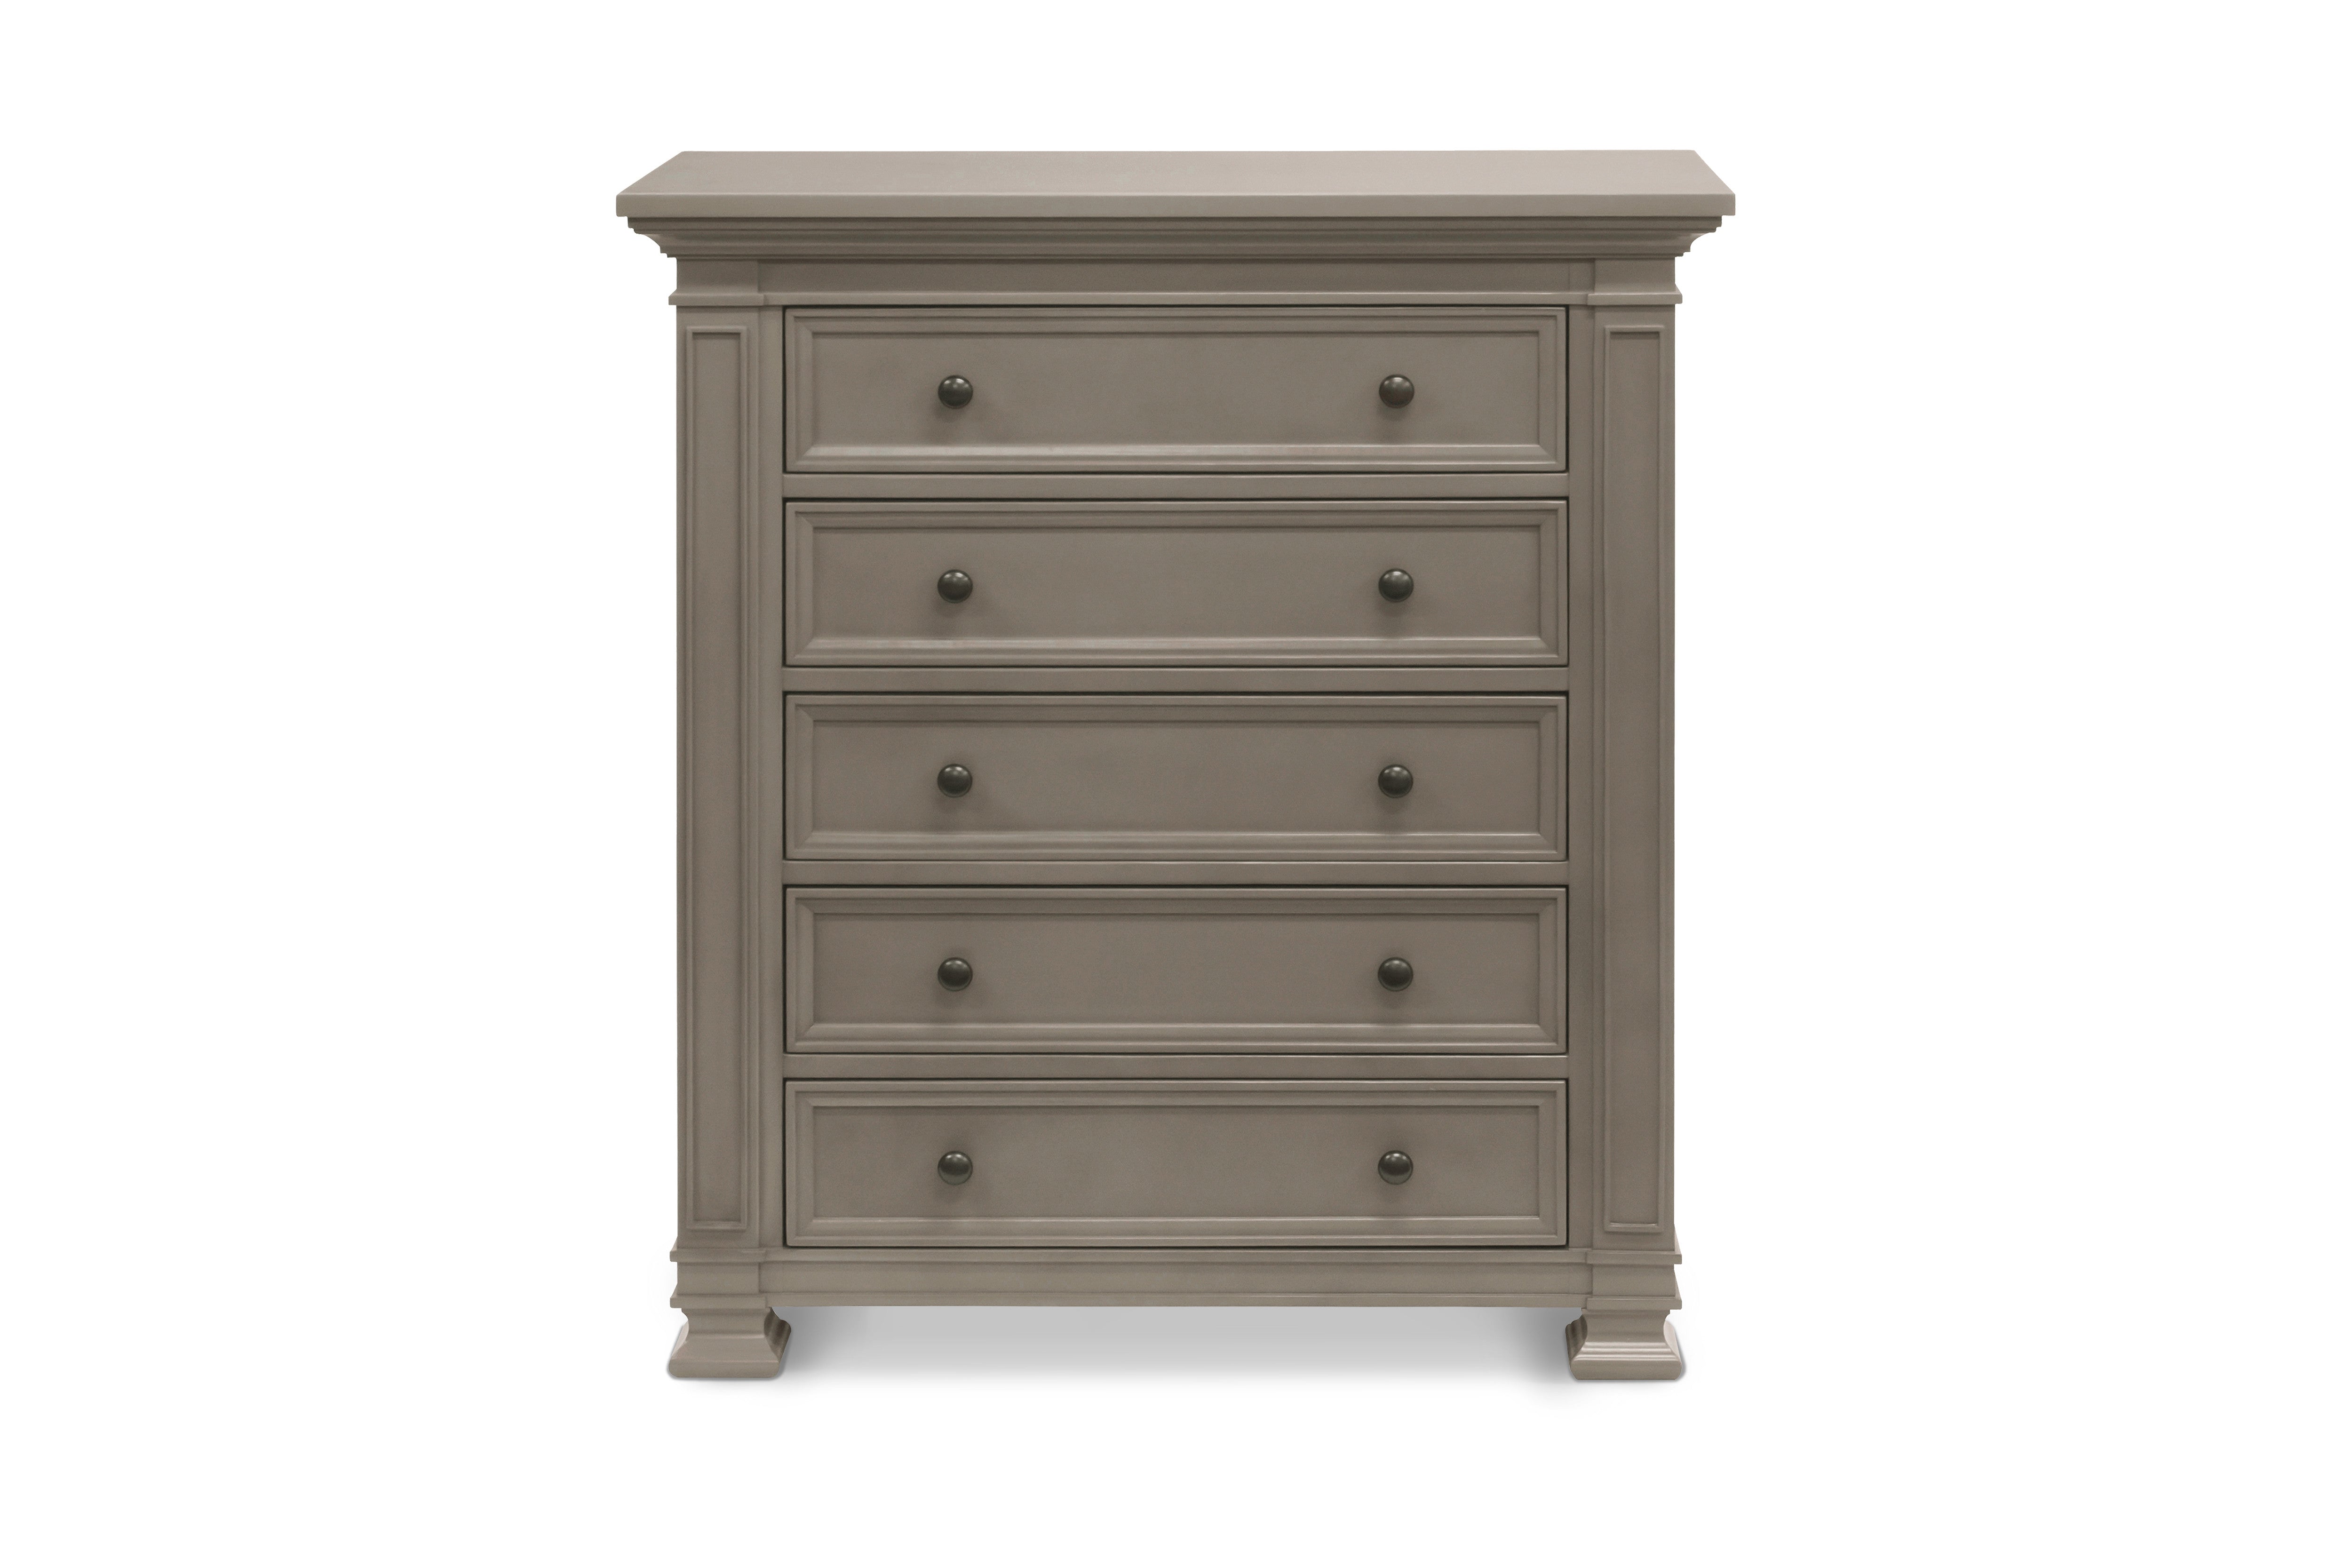 M7617WG,Classic Tall Dresser In Washed Grey Finish